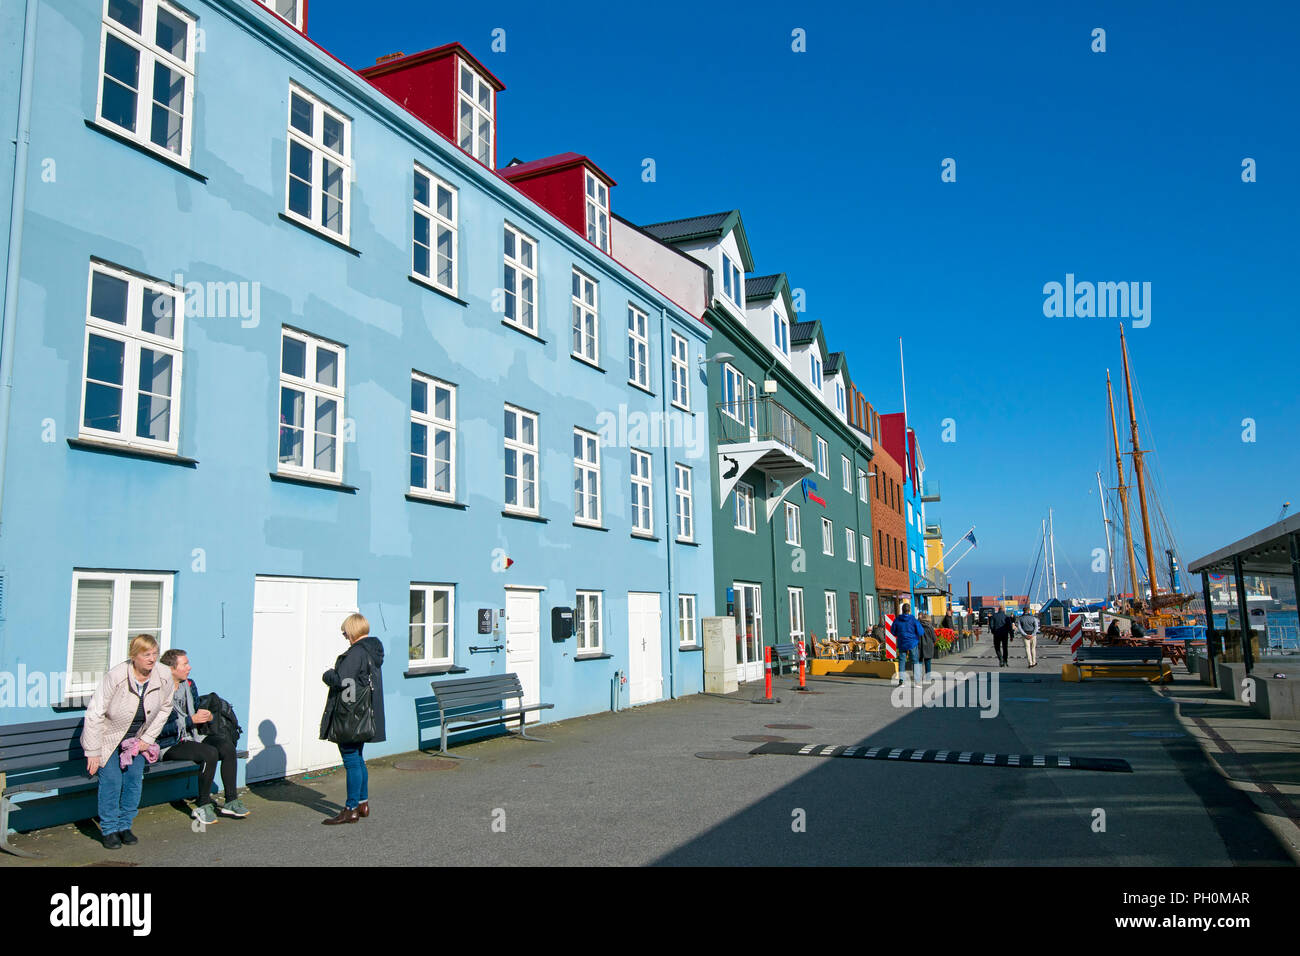 Row of old houses in the harbour of Thorshavn Faeroe Islands, Denmark Stock Photo